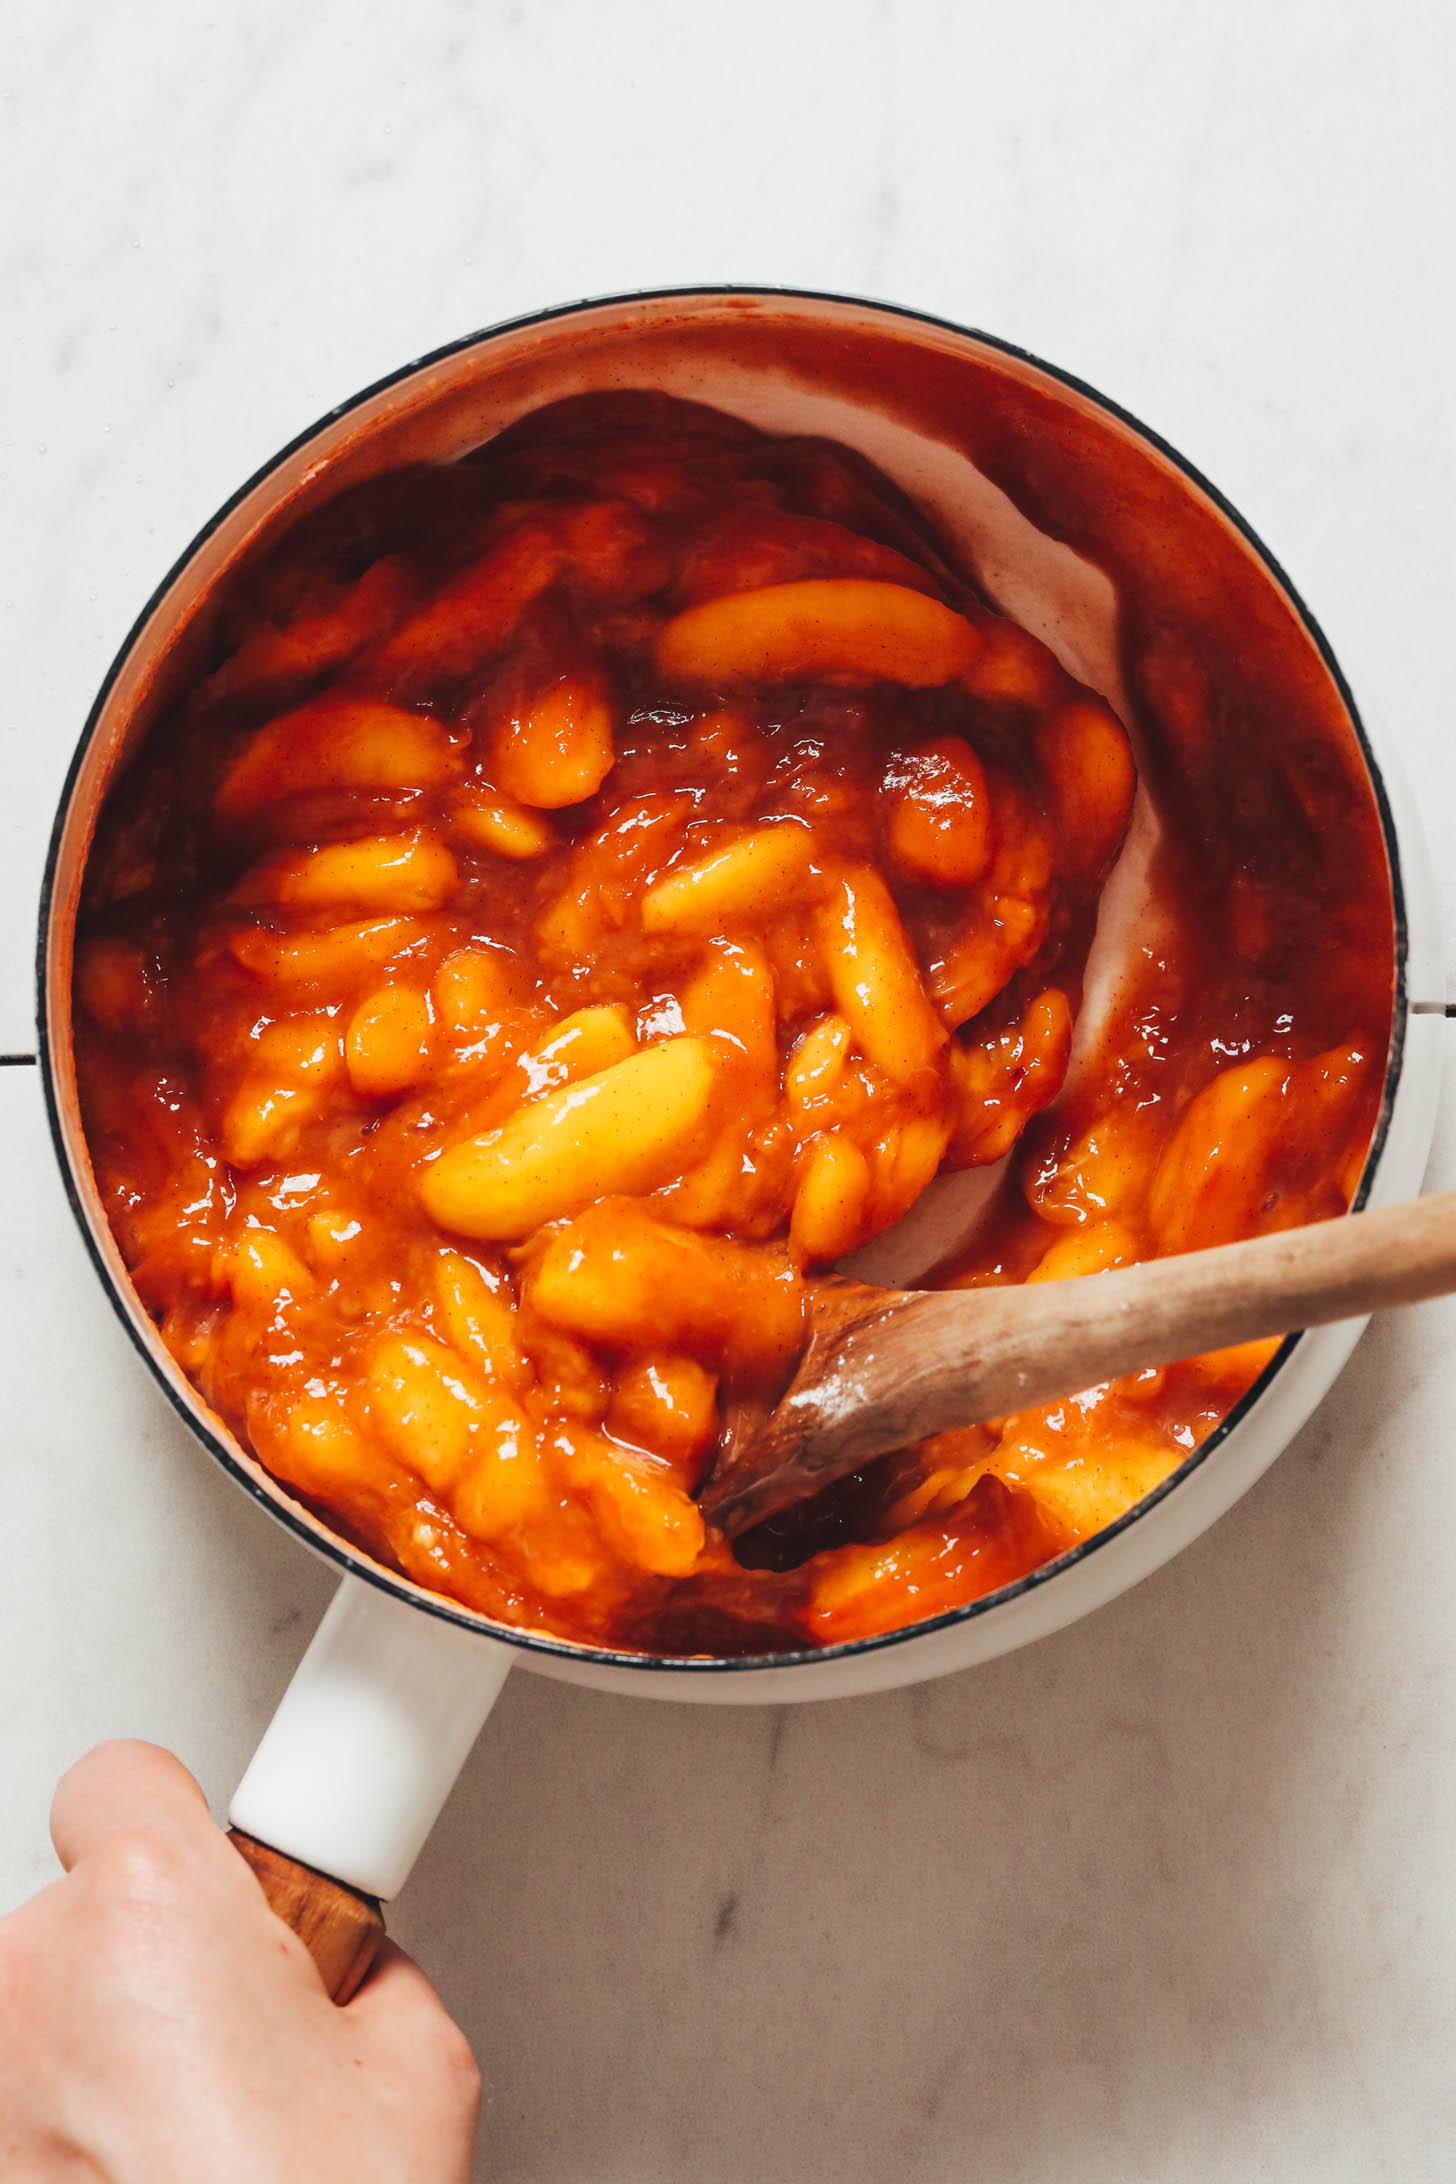 Saucy cinnamon-infused peaches in a white saucepan